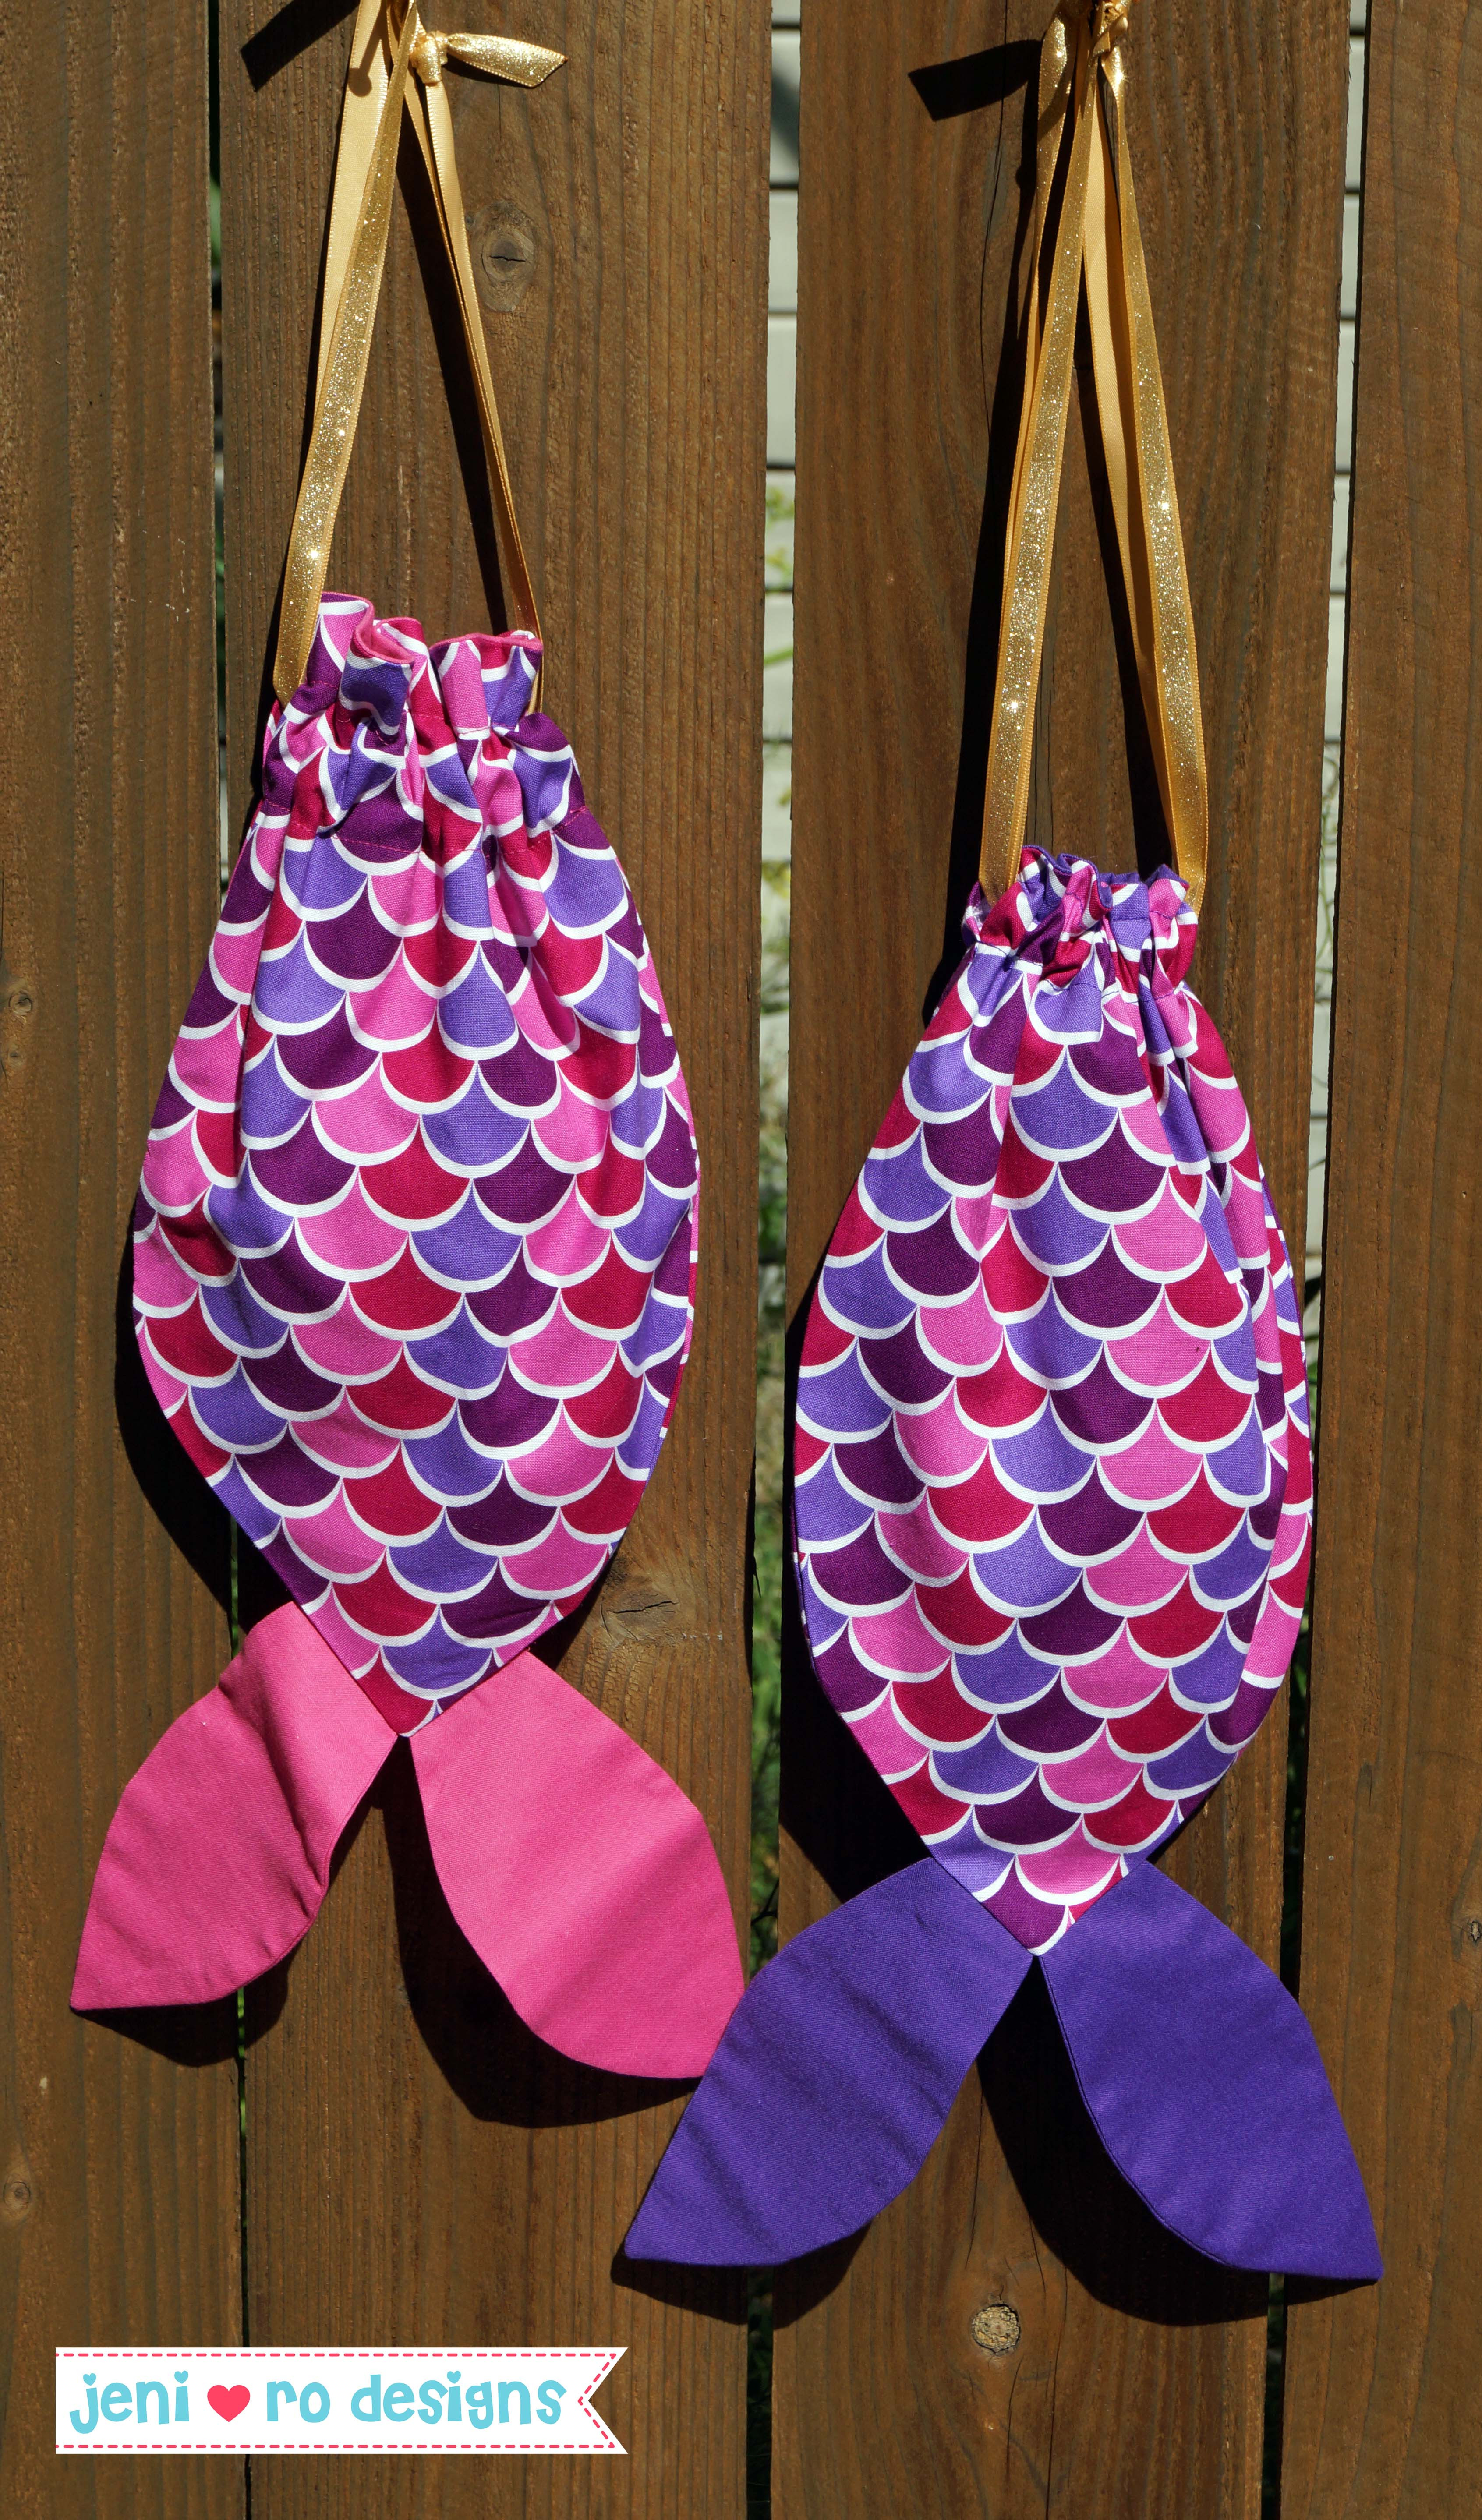 Mermaid Party Bag Ideas
 Mermaid Tail Bags for Miss O’s party